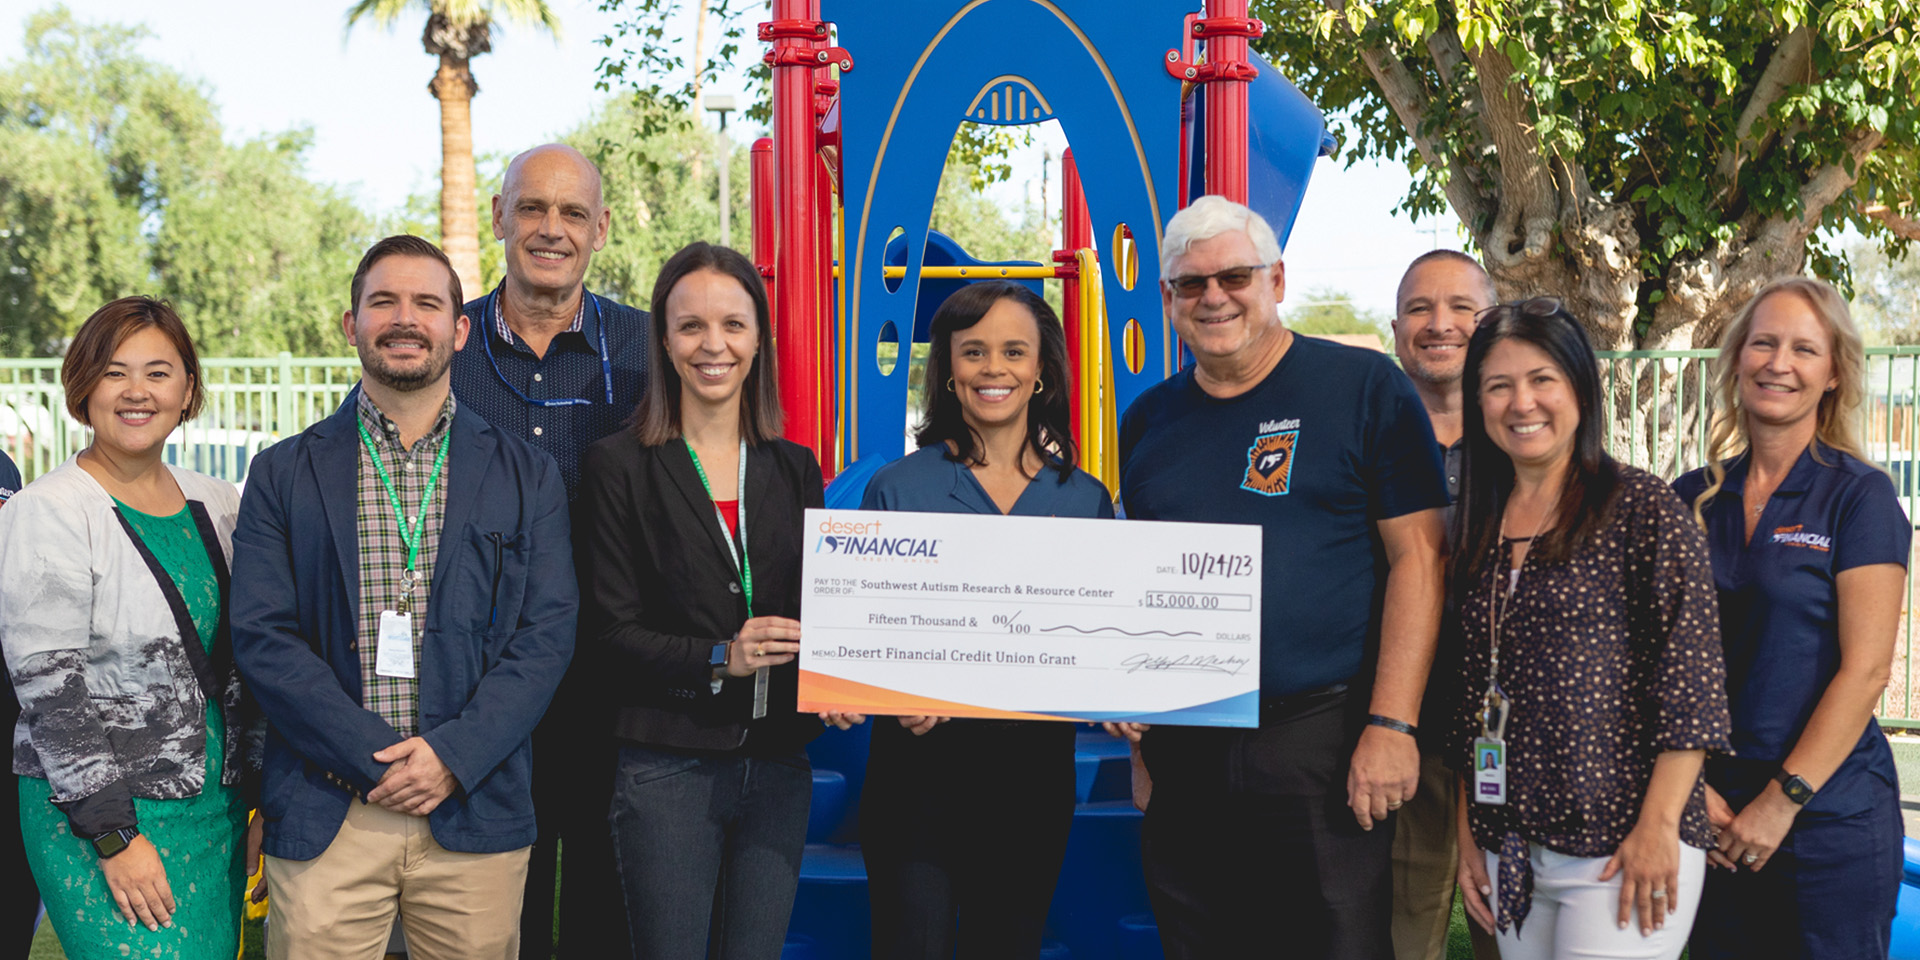 Kevin Haskew, Carlissa Wright, Jeff Meshey, and others joyfully celebrate Desert Financial's generous donation of $15,000 to the Southwest Autism Research & Resource Center. The group proudly displays an enlarged check at an outdoor playground, symbolizing their commitment to community support and philanthropy.